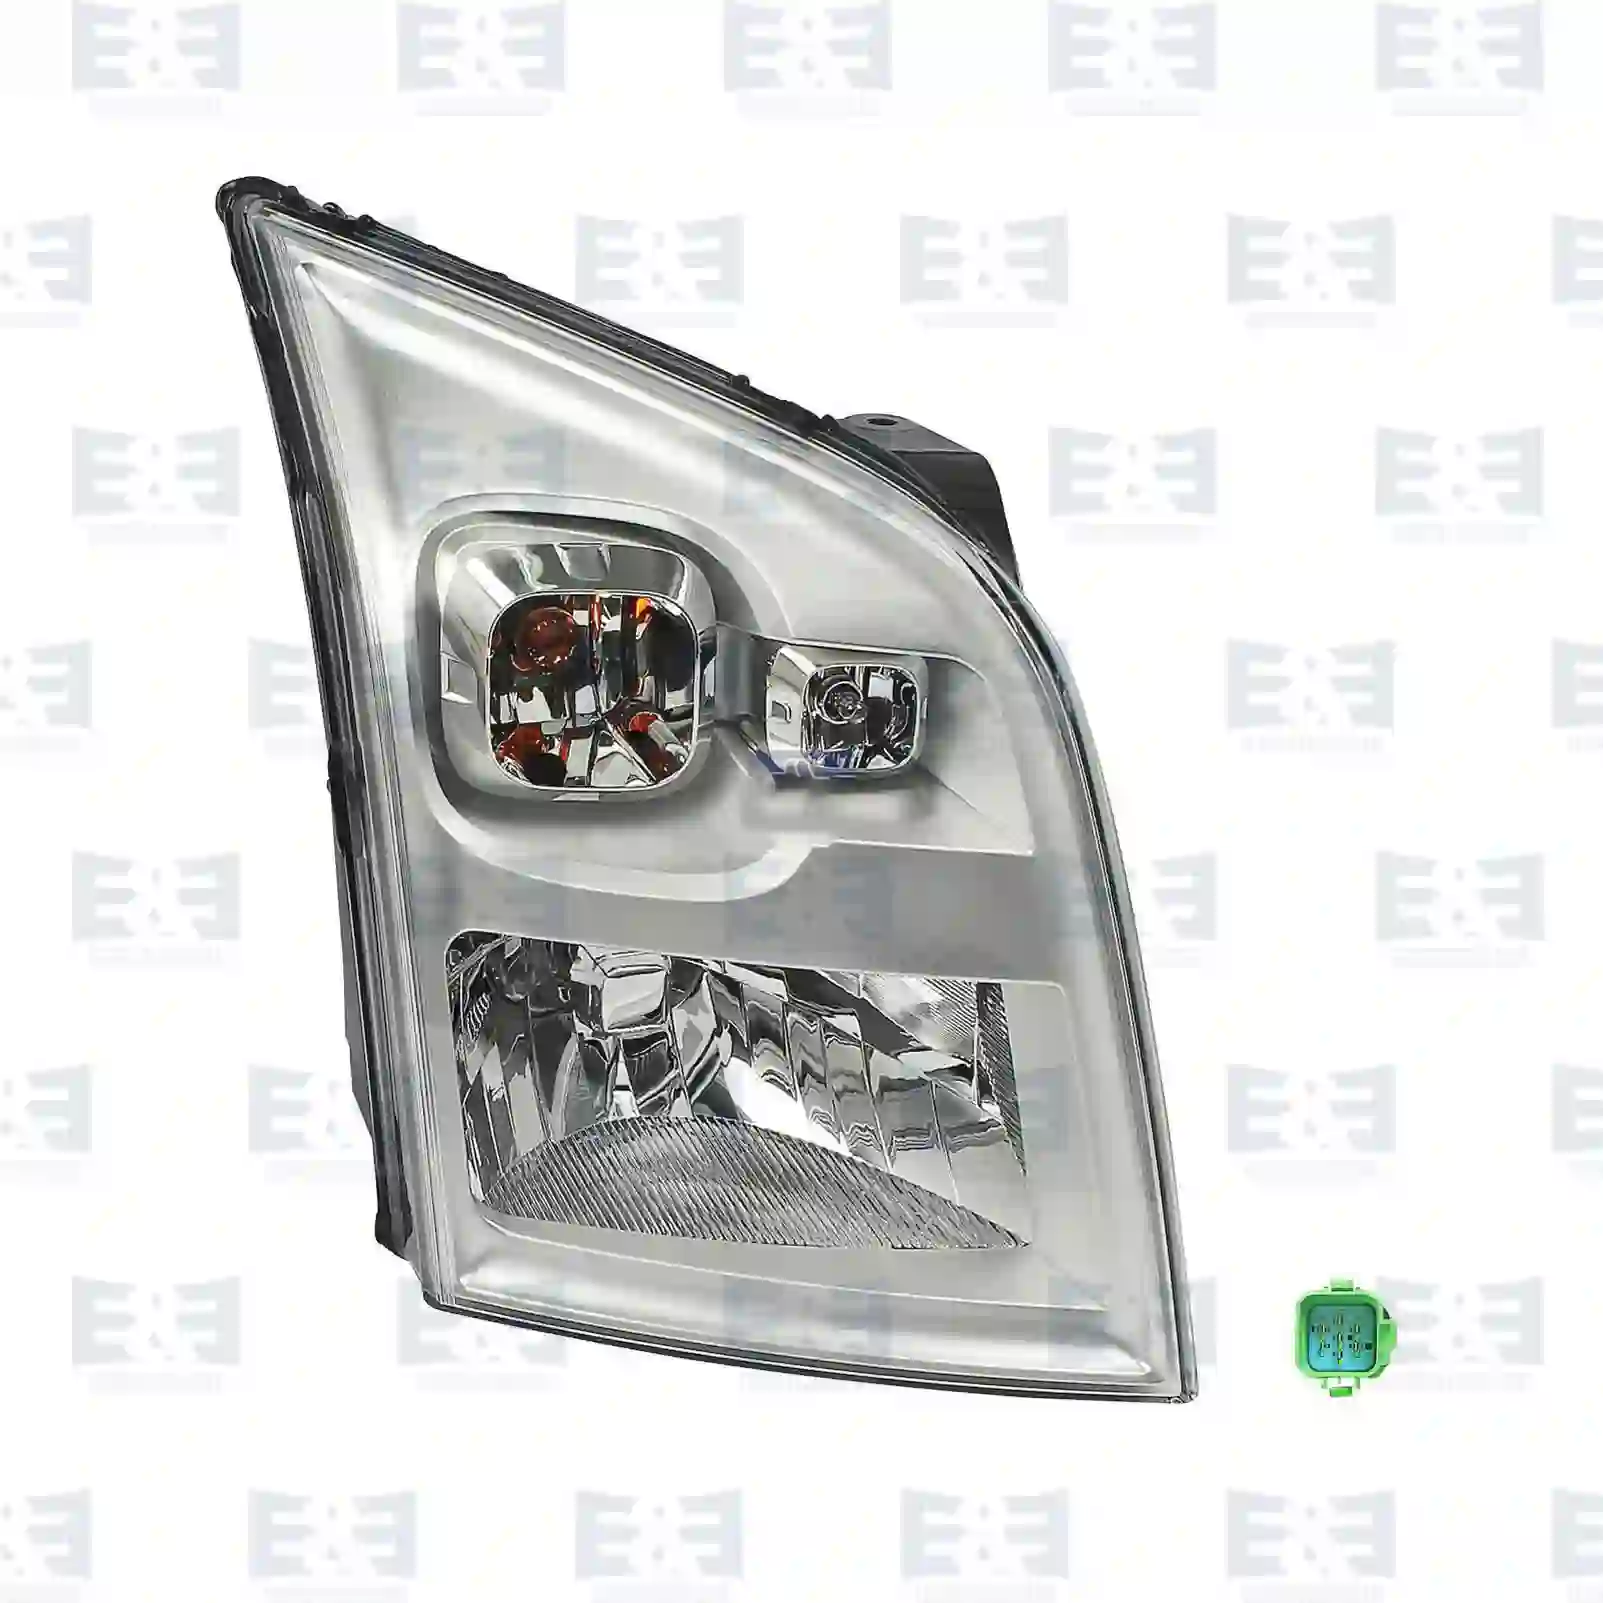 Headlamp, right, electrical height control, 2E2299850, 1452500, 1486097, 1504680, 1545513, 1684408, 6C11-13100-EA, 6C11-13W029-DC, 6C11-13W029-DD, 6C11-13W029-DE, 6C11-13W029-DF ||  2E2299850 E&E Truck Spare Parts | Truck Spare Parts, Auotomotive Spare Parts Headlamp, right, electrical height control, 2E2299850, 1452500, 1486097, 1504680, 1545513, 1684408, 6C11-13100-EA, 6C11-13W029-DC, 6C11-13W029-DD, 6C11-13W029-DE, 6C11-13W029-DF ||  2E2299850 E&E Truck Spare Parts | Truck Spare Parts, Auotomotive Spare Parts